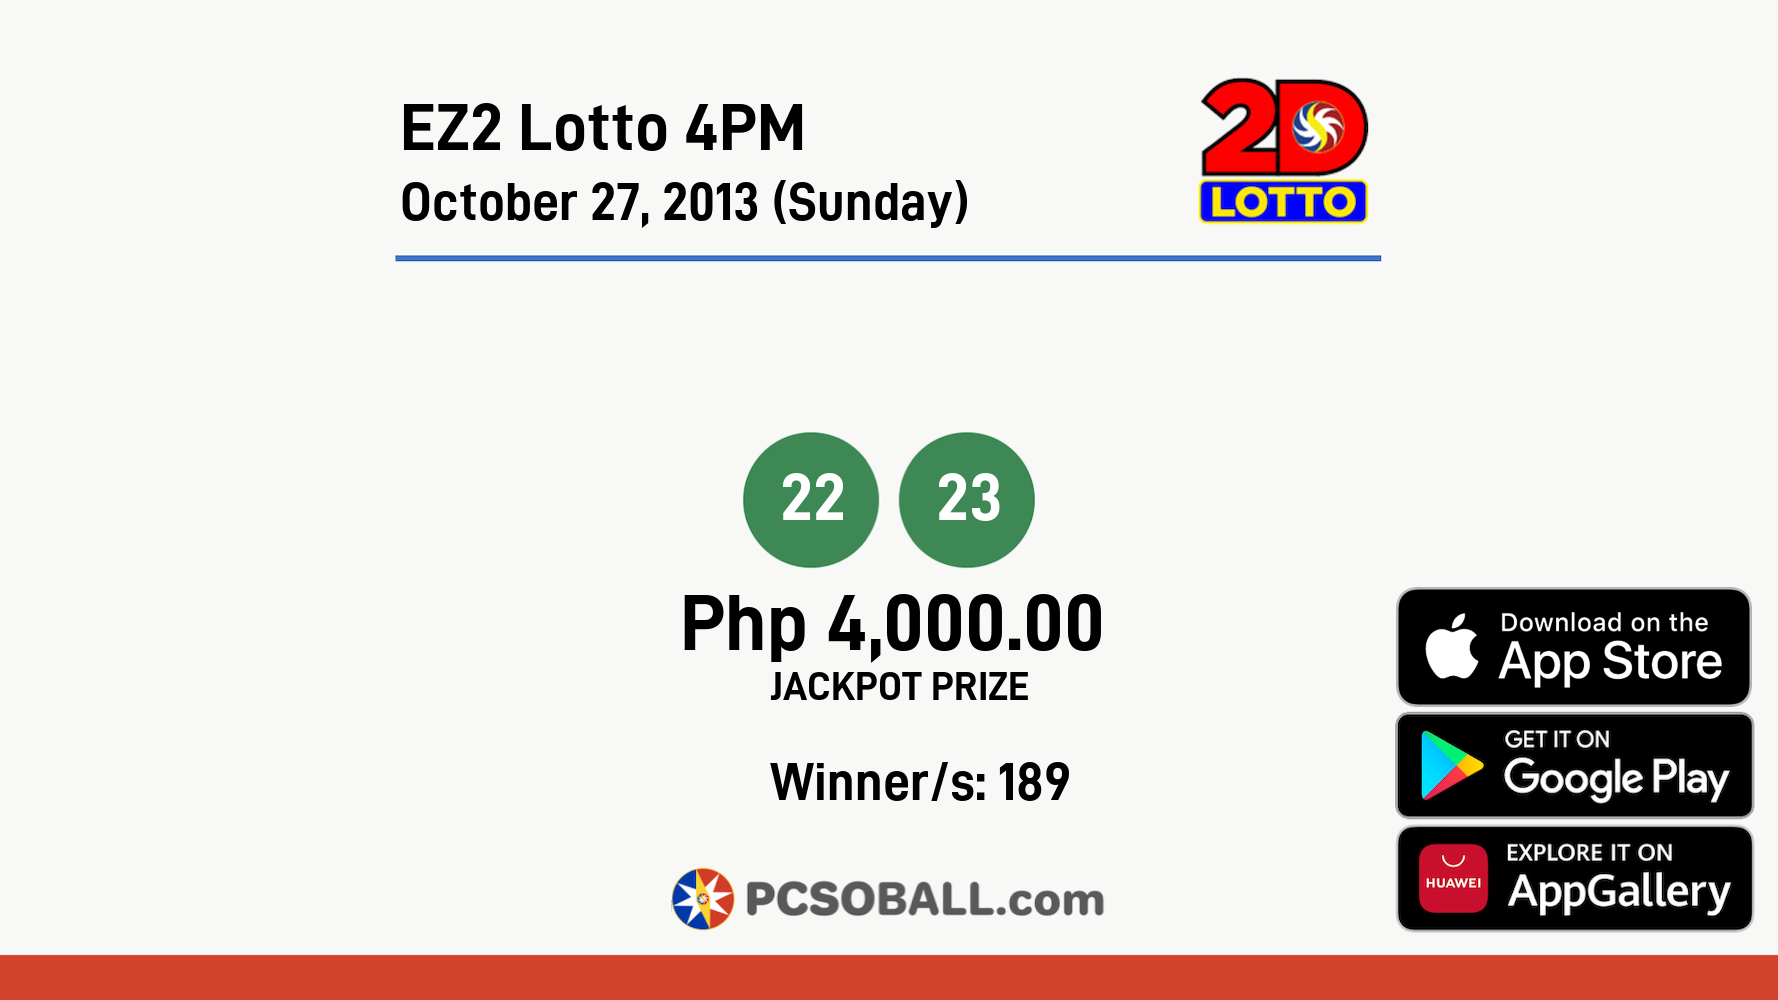 EZ2 Lotto 4PM October 27, 2013 (Sunday) Result